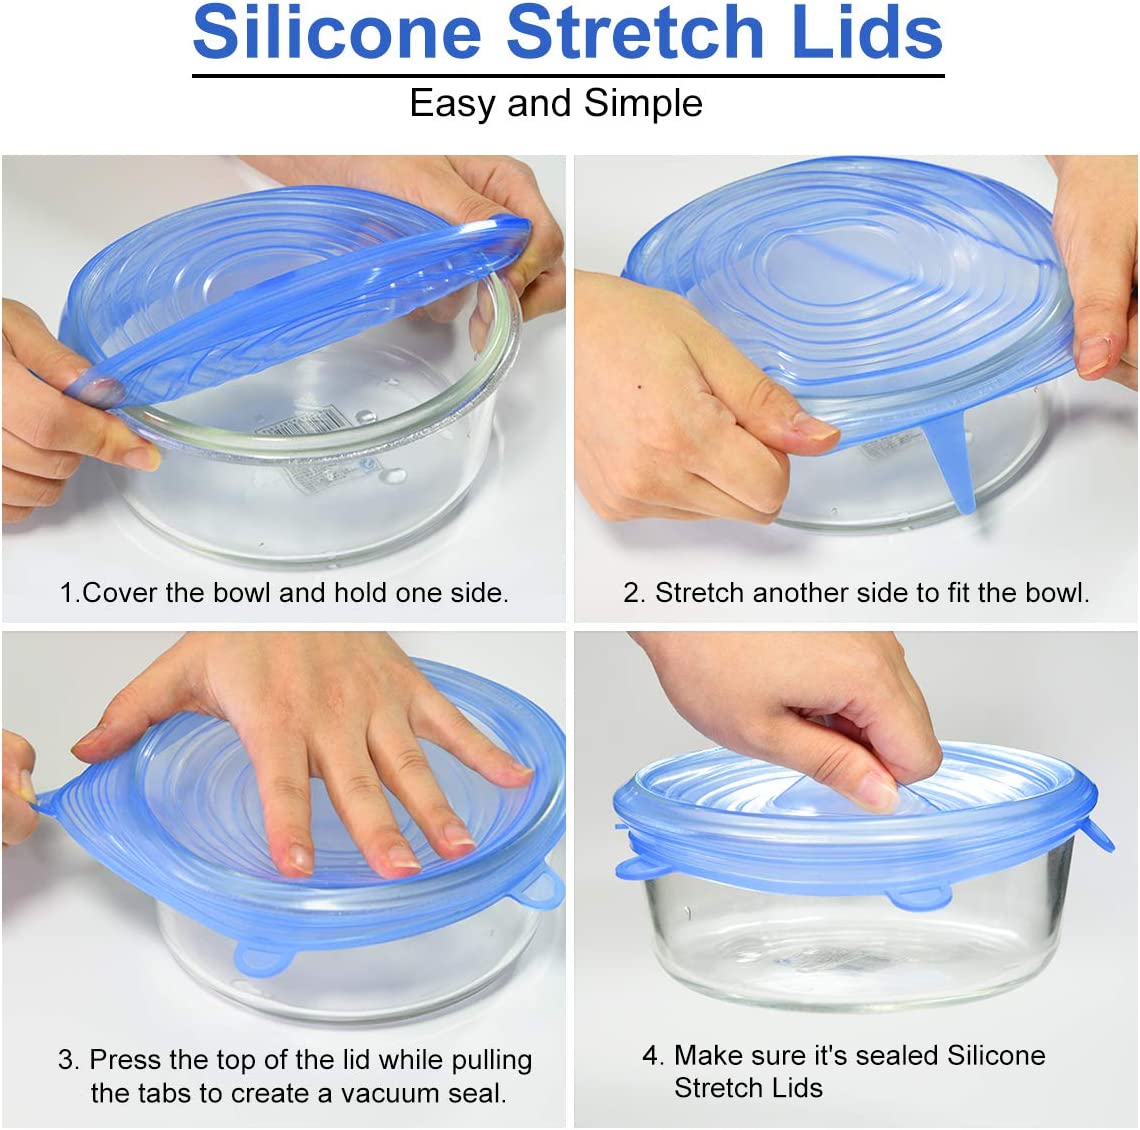 Silicone Stretch Lids, 12 Pack Reusable Silicone Bowl Covers, Flexible Food  Container Cover, Durable Silicone Lids for Bowls, Cans, Cups, Pots 